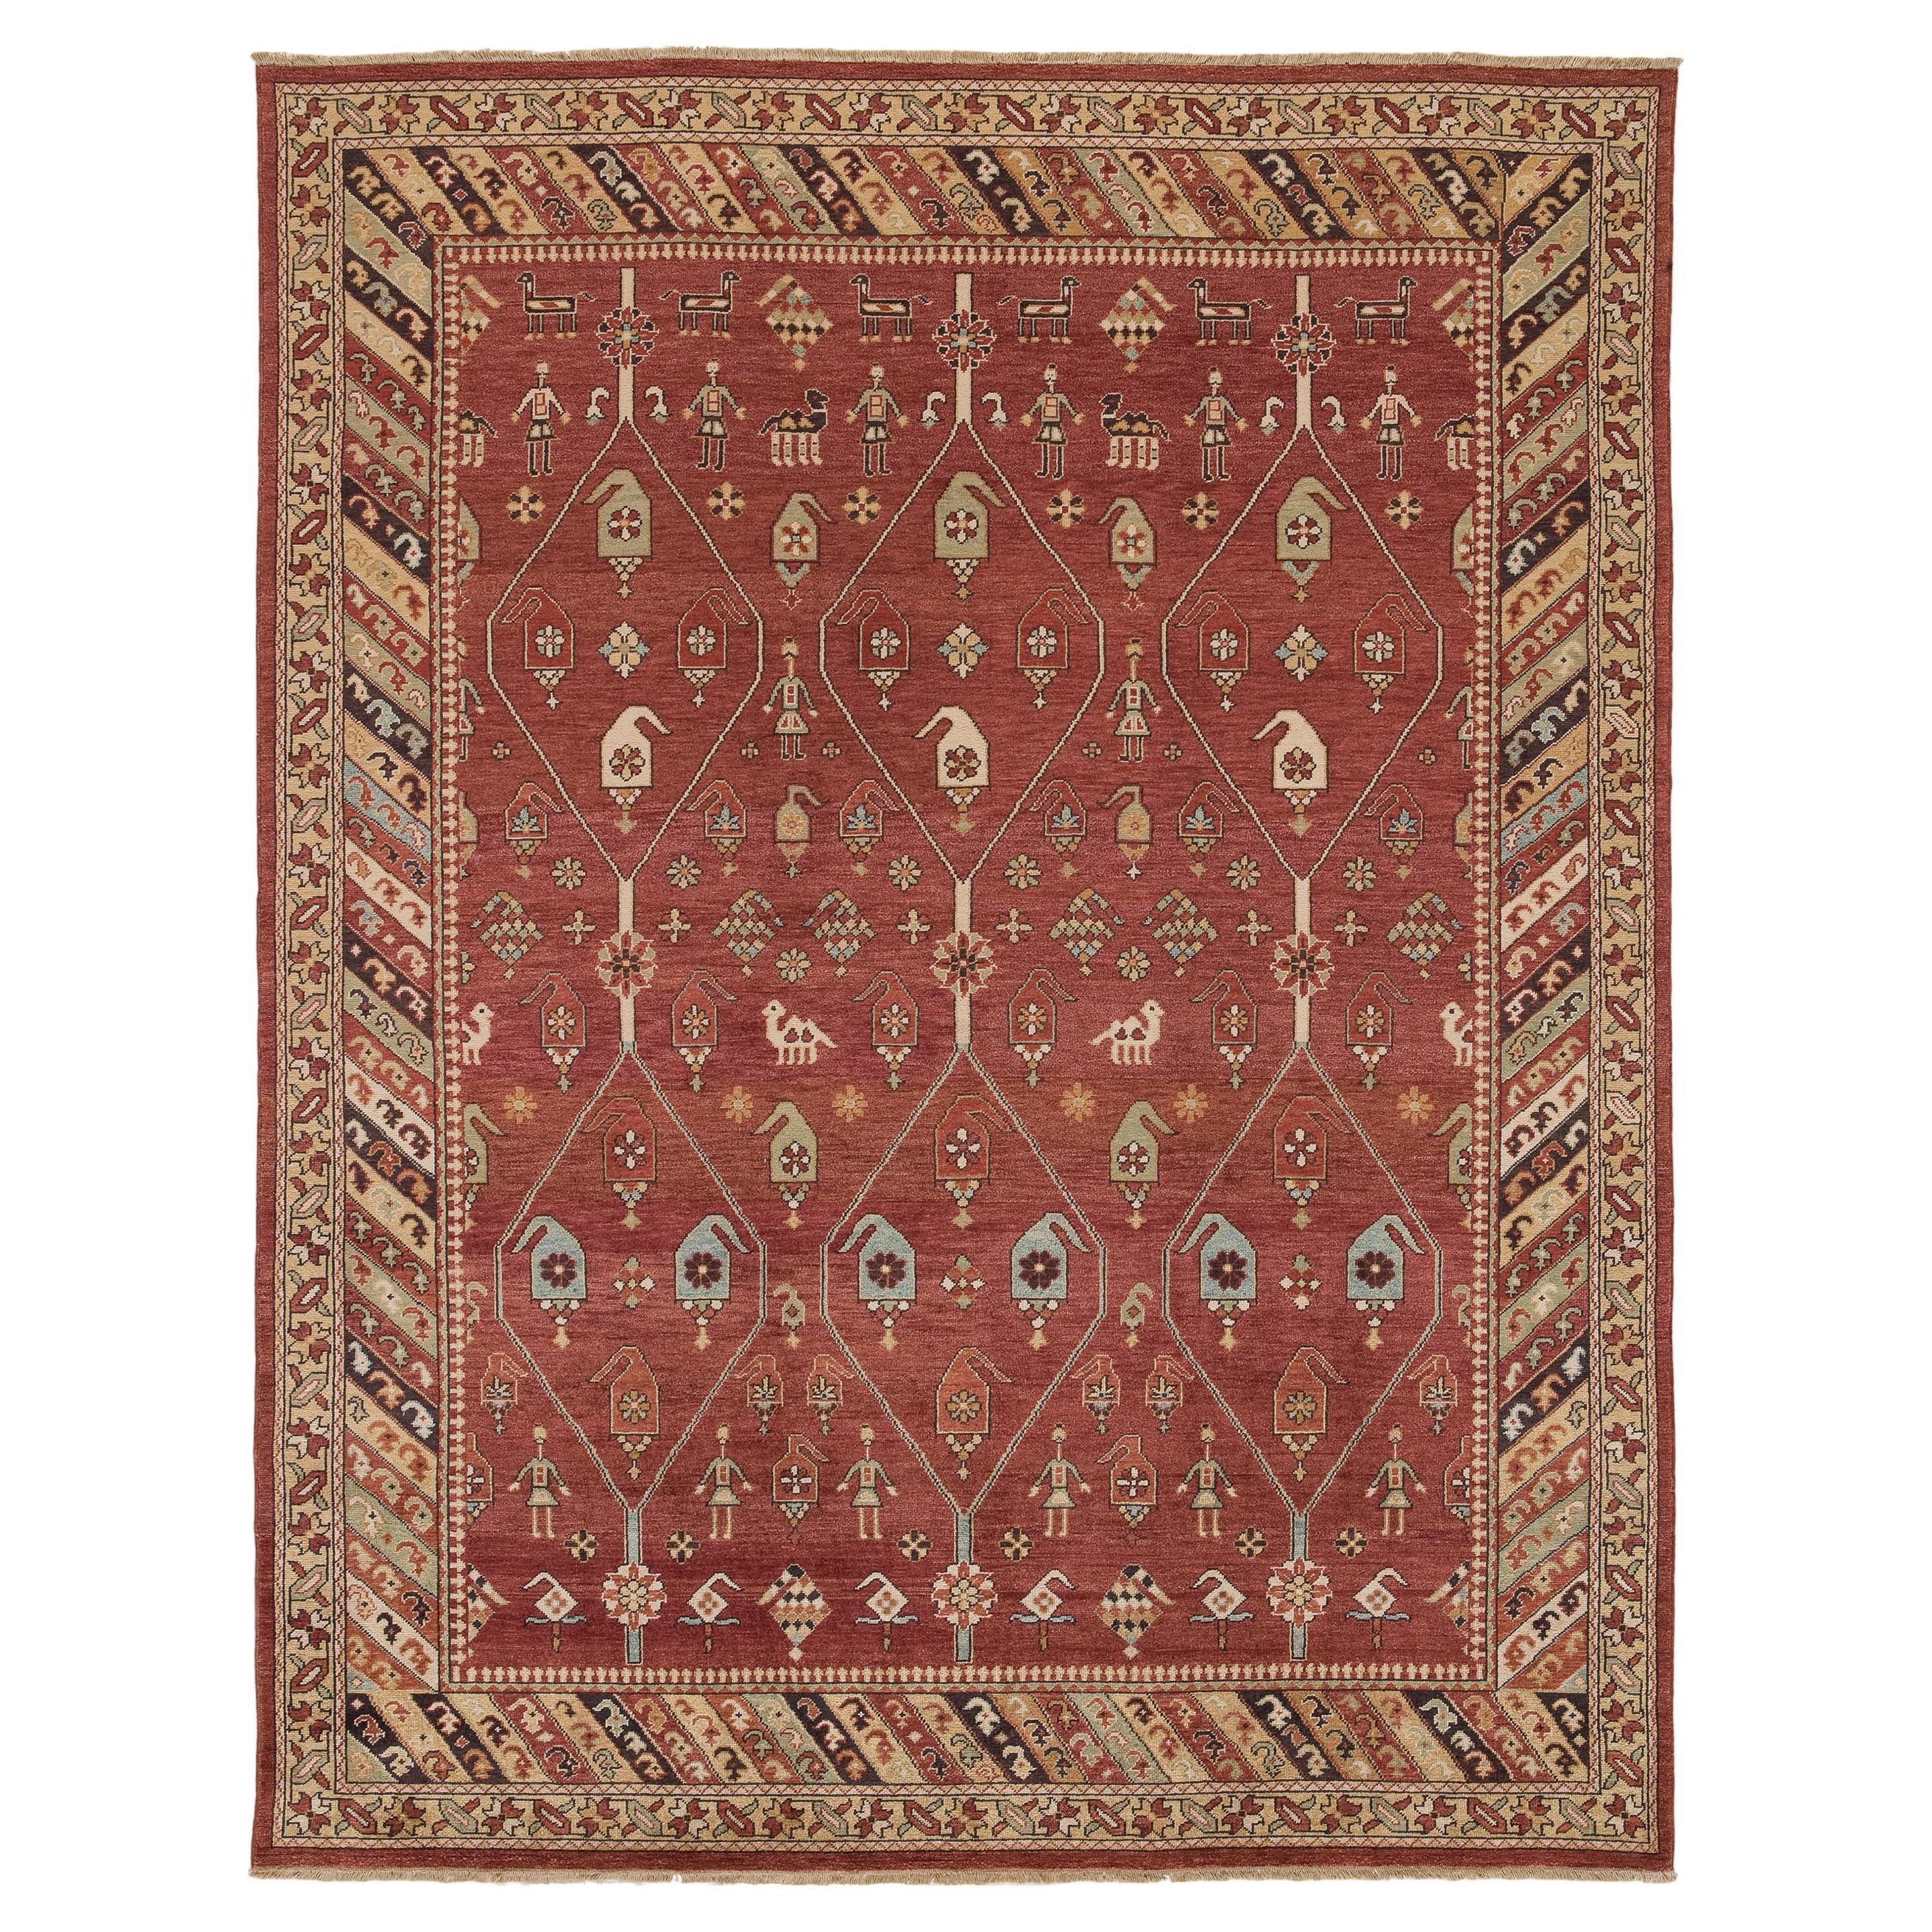 Luxury Traditional Hand-Knotted Red/Brown 12x15 Rug